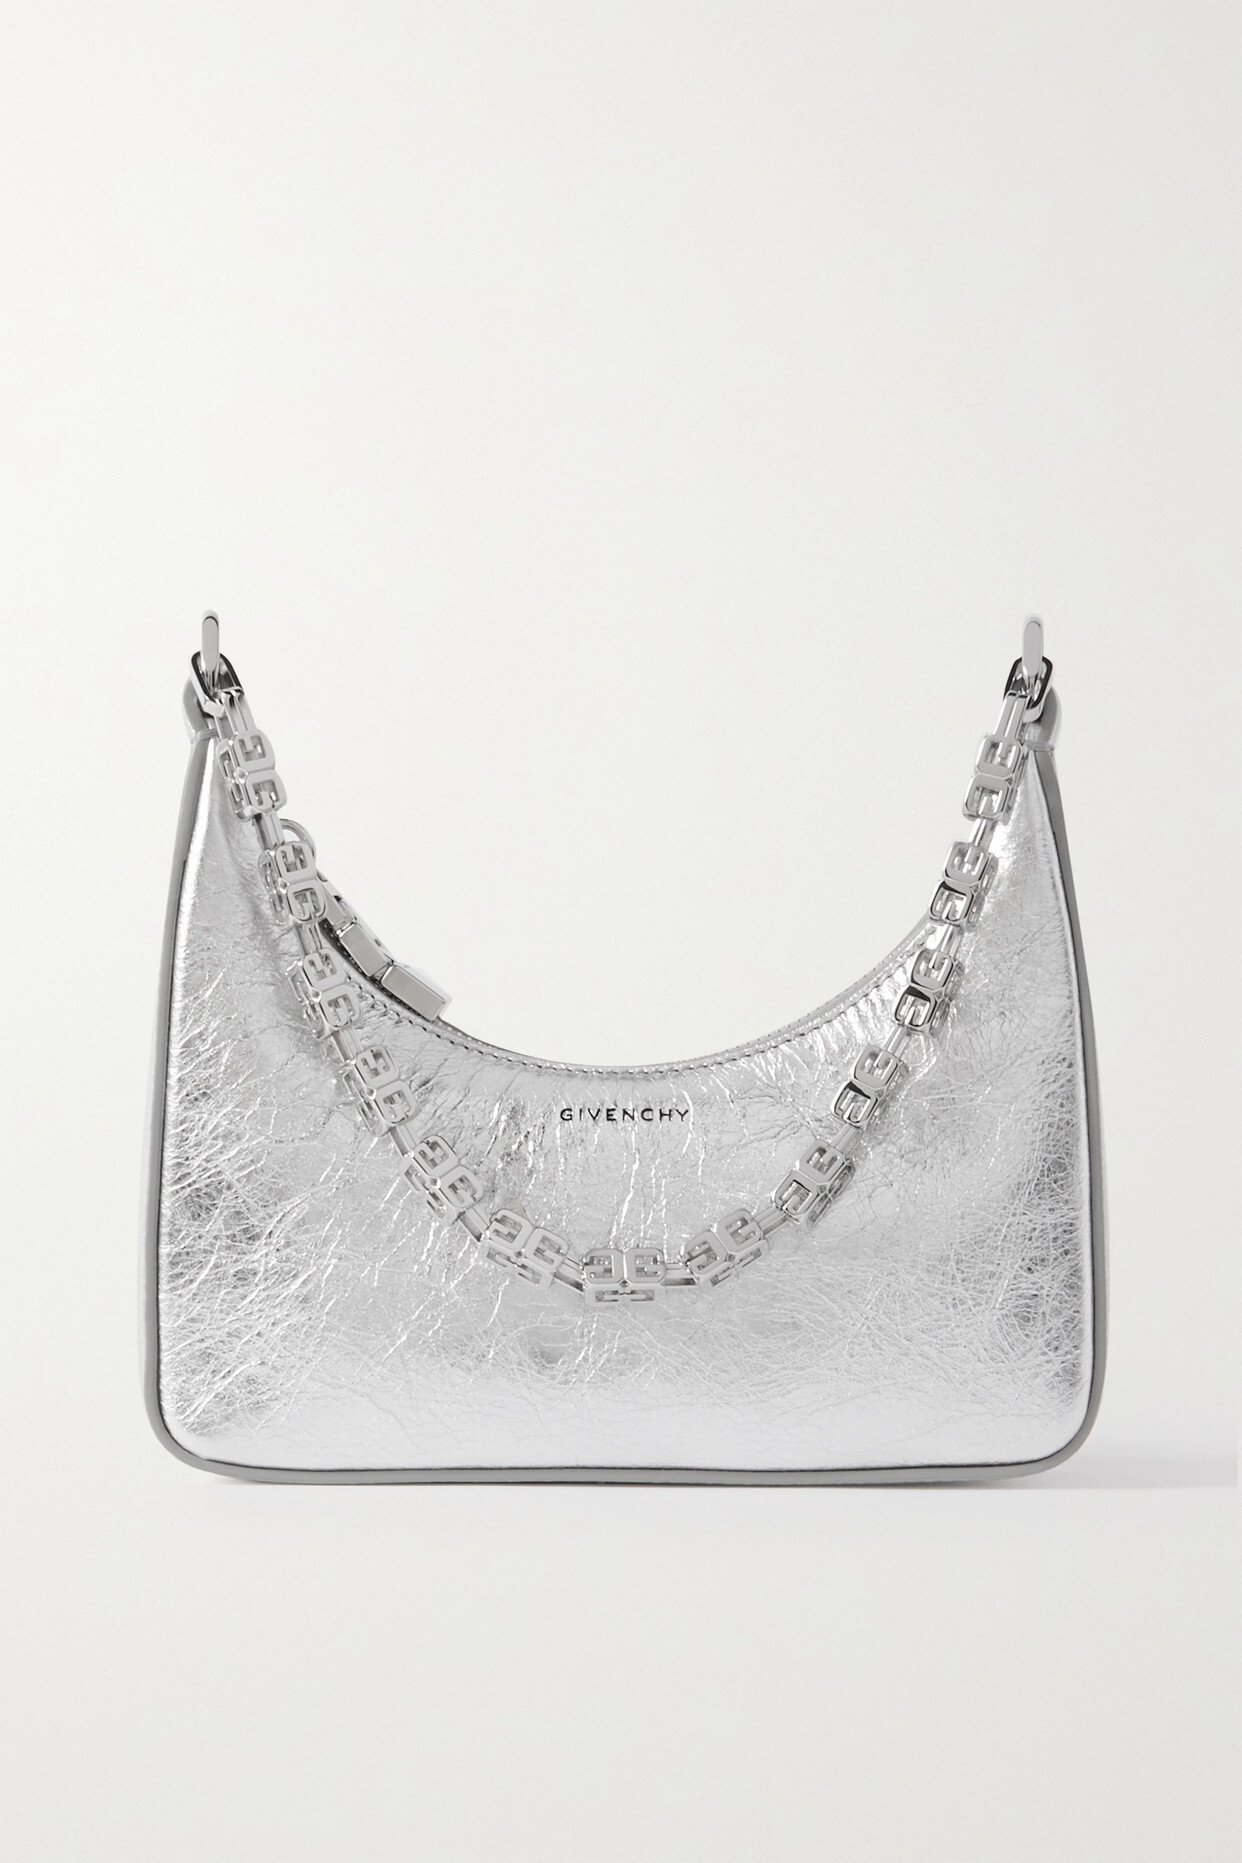 Givenchy - Moon Cut Out Small Metallic Crinkled-leather Shoulder Bag - Silver